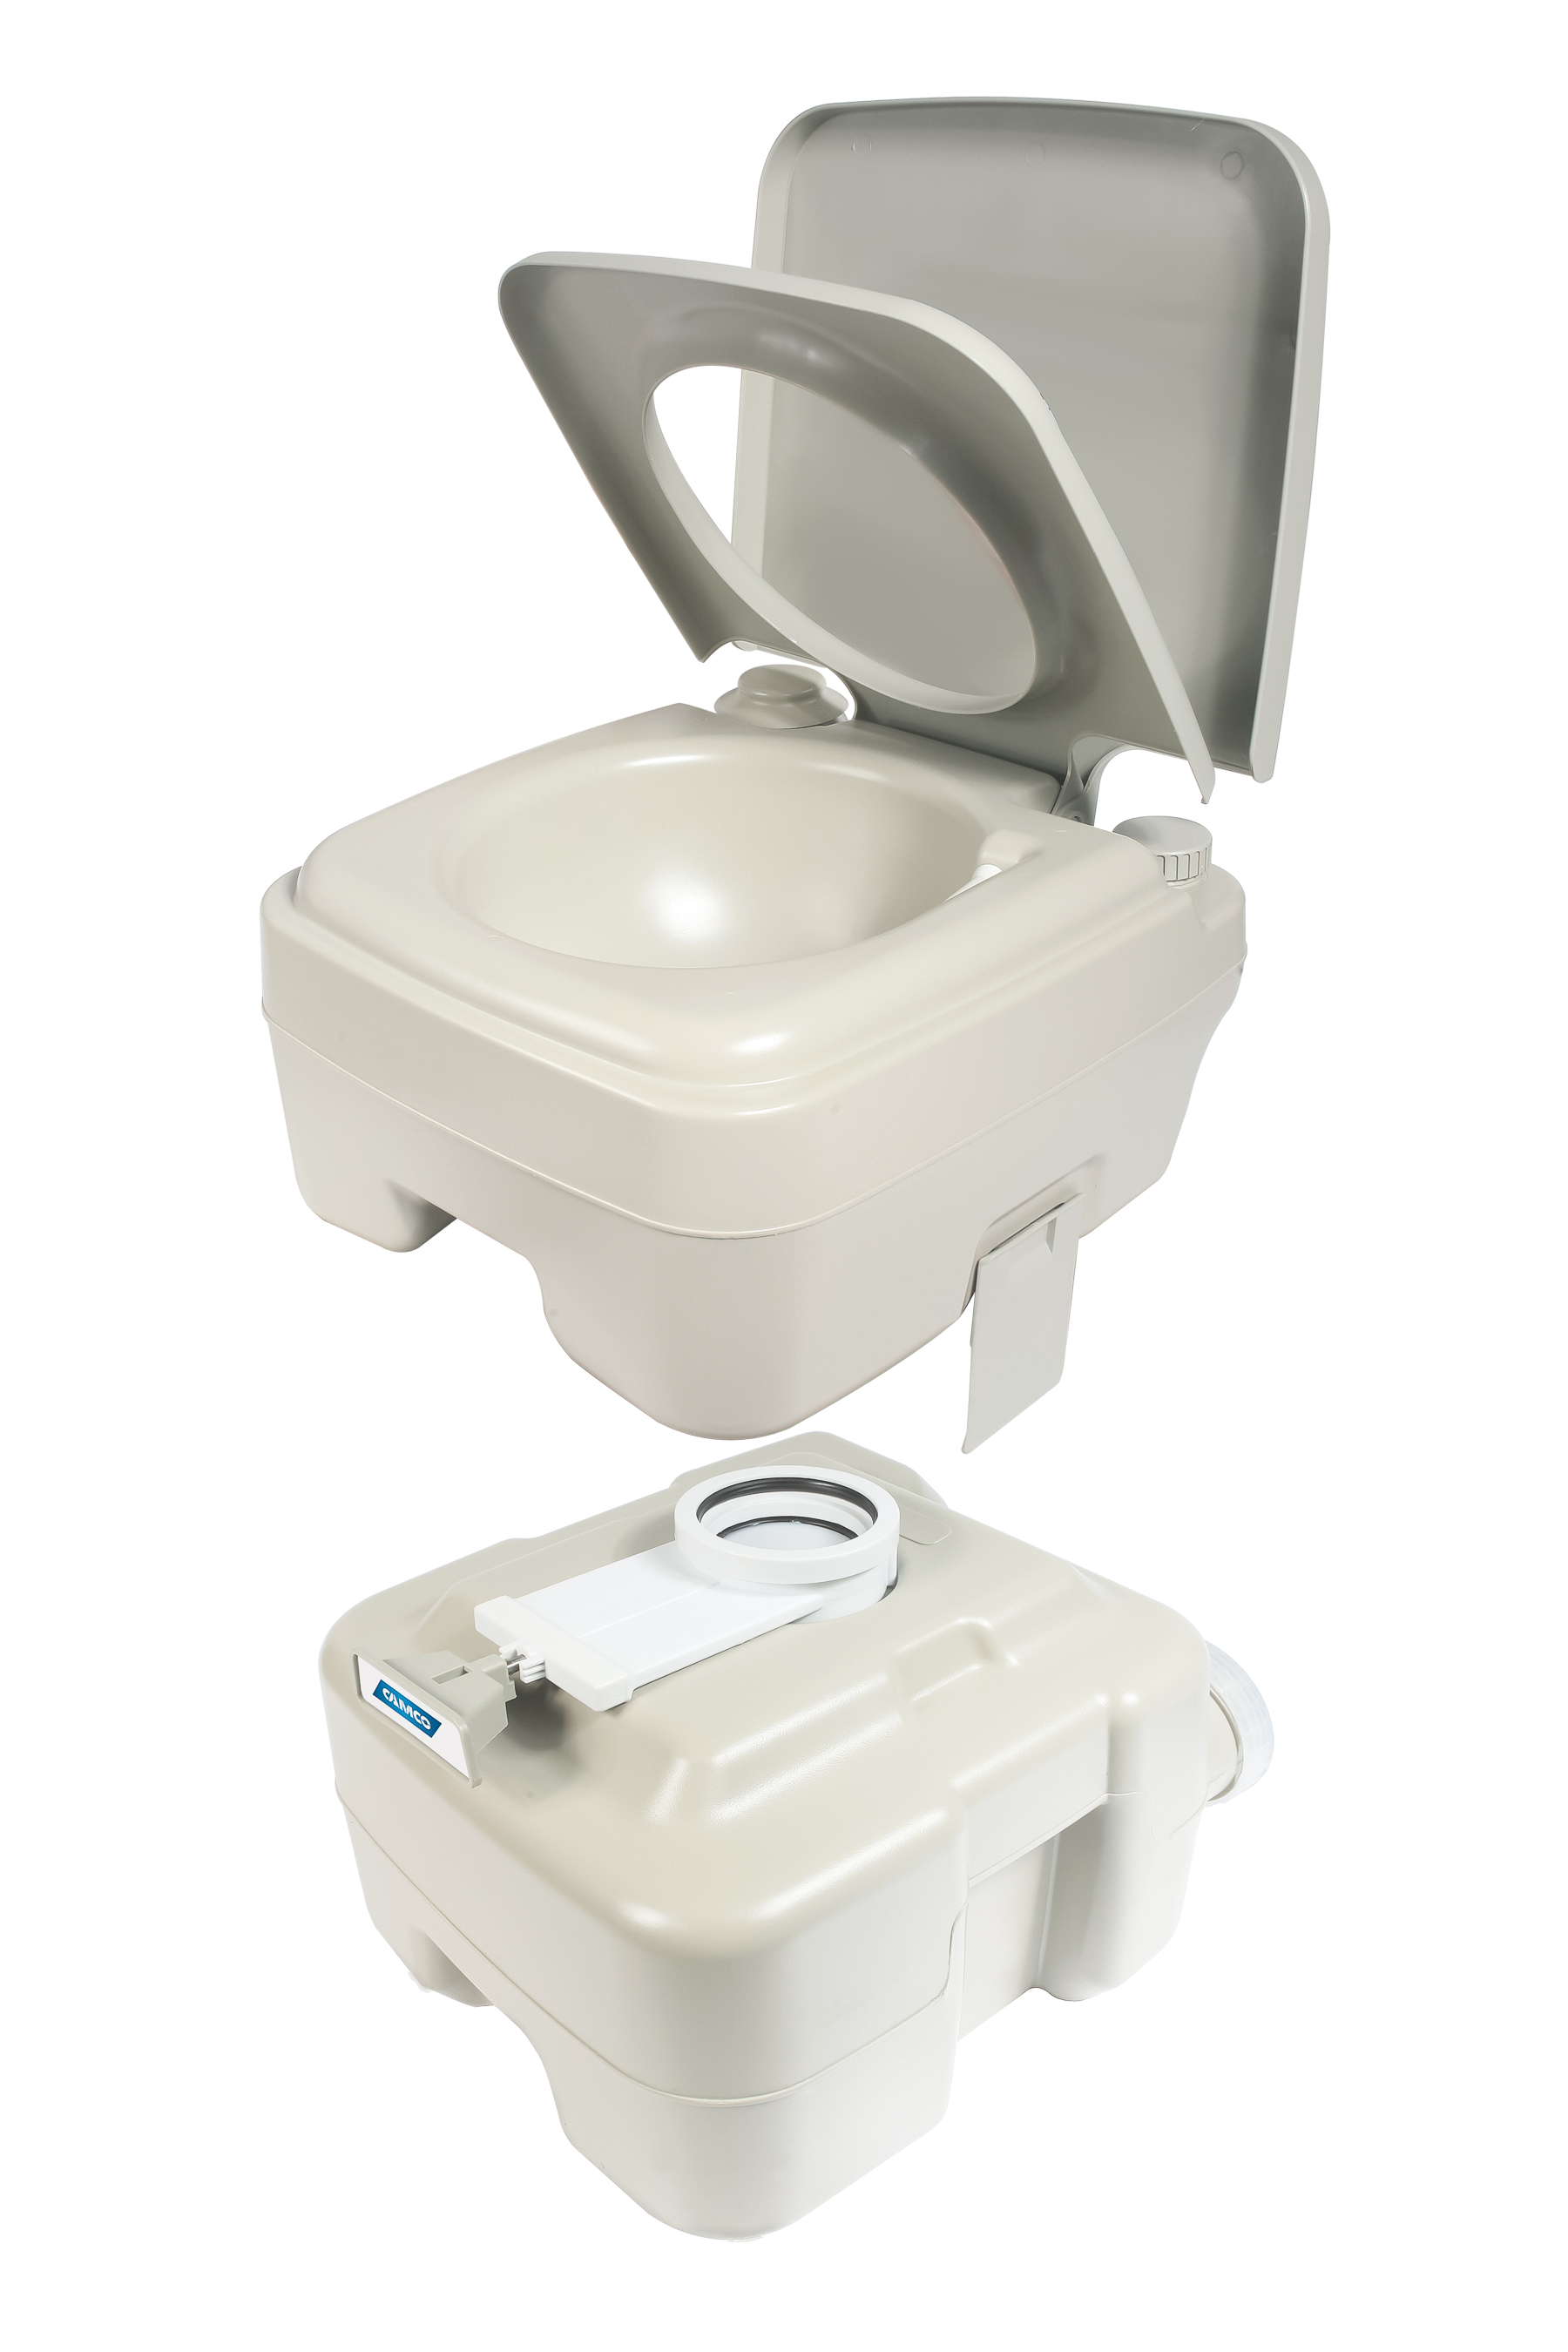 Camco 41541 Portable Toilet, 5.3 Gallon for RV, Camping, Boating and Outdoor - image 4 of 5